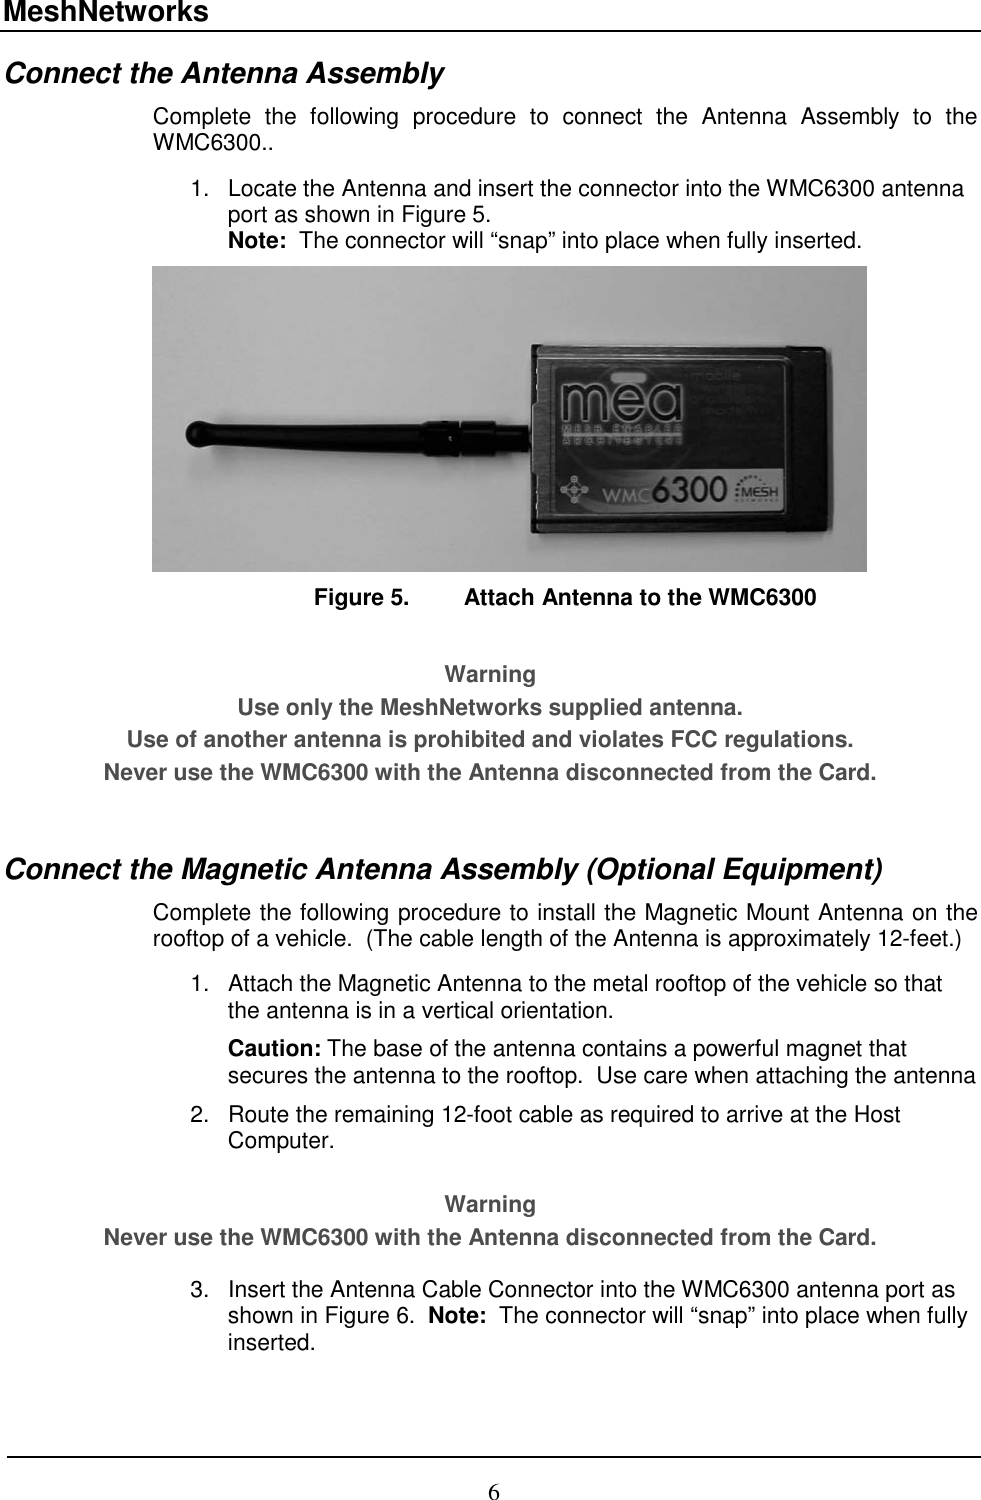 MeshNetworks 6 Connect the Antenna Assembly  Complete the following procedure to connect the Antenna Assembly to the WMC6300..     1.  Locate the Antenna and insert the connector into the WMC6300 antenna port as shown in Figure 5.   Note:  The connector will “snap” into place when fully inserted.  Figure 5.  Attach Antenna to the WMC6300  Warning Use only the MeshNetworks supplied antenna.   Use of another antenna is prohibited and violates FCC regulations.  Never use the WMC6300 with the Antenna disconnected from the Card.  Connect the Magnetic Antenna Assembly (Optional Equipment) Complete the following procedure to install the Magnetic Mount Antenna on the rooftop of a vehicle.  (The cable length of the Antenna is approximately 12-feet.)  1.  Attach the Magnetic Antenna to the metal rooftop of the vehicle so that the antenna is in a vertical orientation.   Caution: The base of the antenna contains a powerful magnet that secures the antenna to the rooftop.  Use care when attaching the antenna 2.  Route the remaining 12-foot cable as required to arrive at the Host Computer.   Warning Never use the WMC6300 with the Antenna disconnected from the Card.  3.  Insert the Antenna Cable Connector into the WMC6300 antenna port as shown in Figure 6.  Note:  The connector will “snap” into place when fully inserted. 